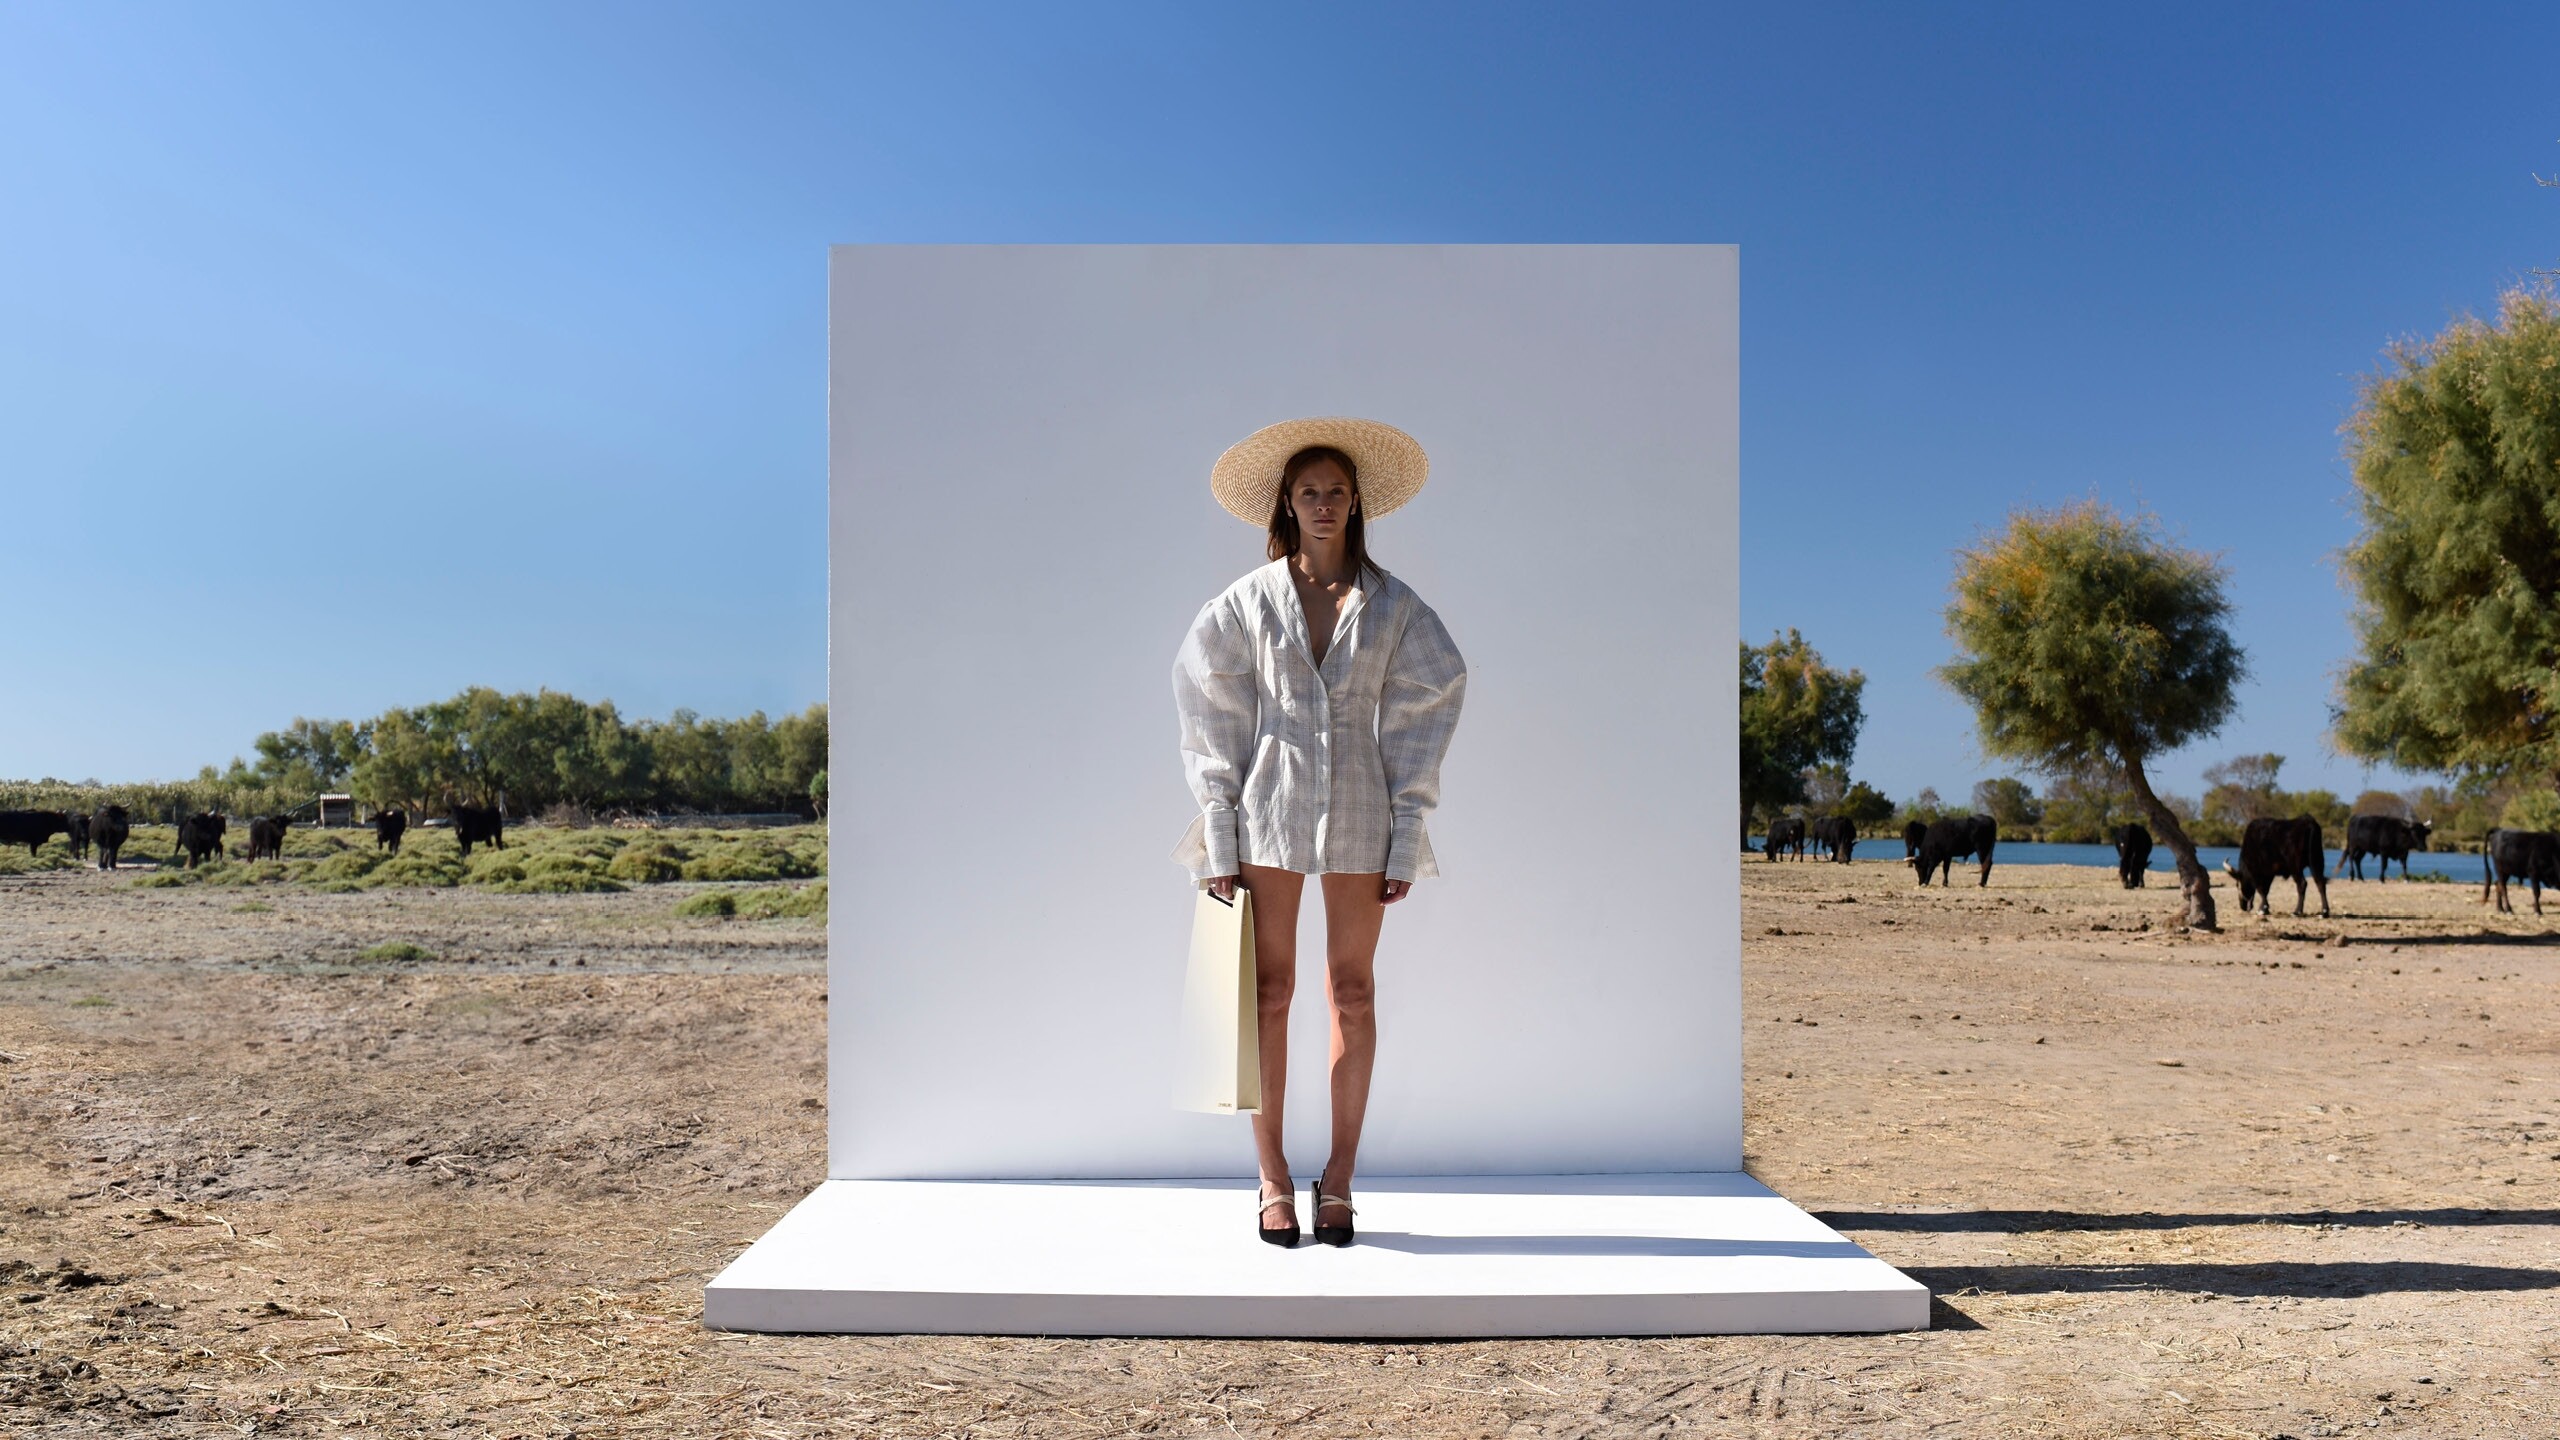 Jacquemus: Popular fashion brand, A range of eternally stylish clothes and iconic accessories, Spring Summer 2017. 2560x1440 HD Wallpaper.